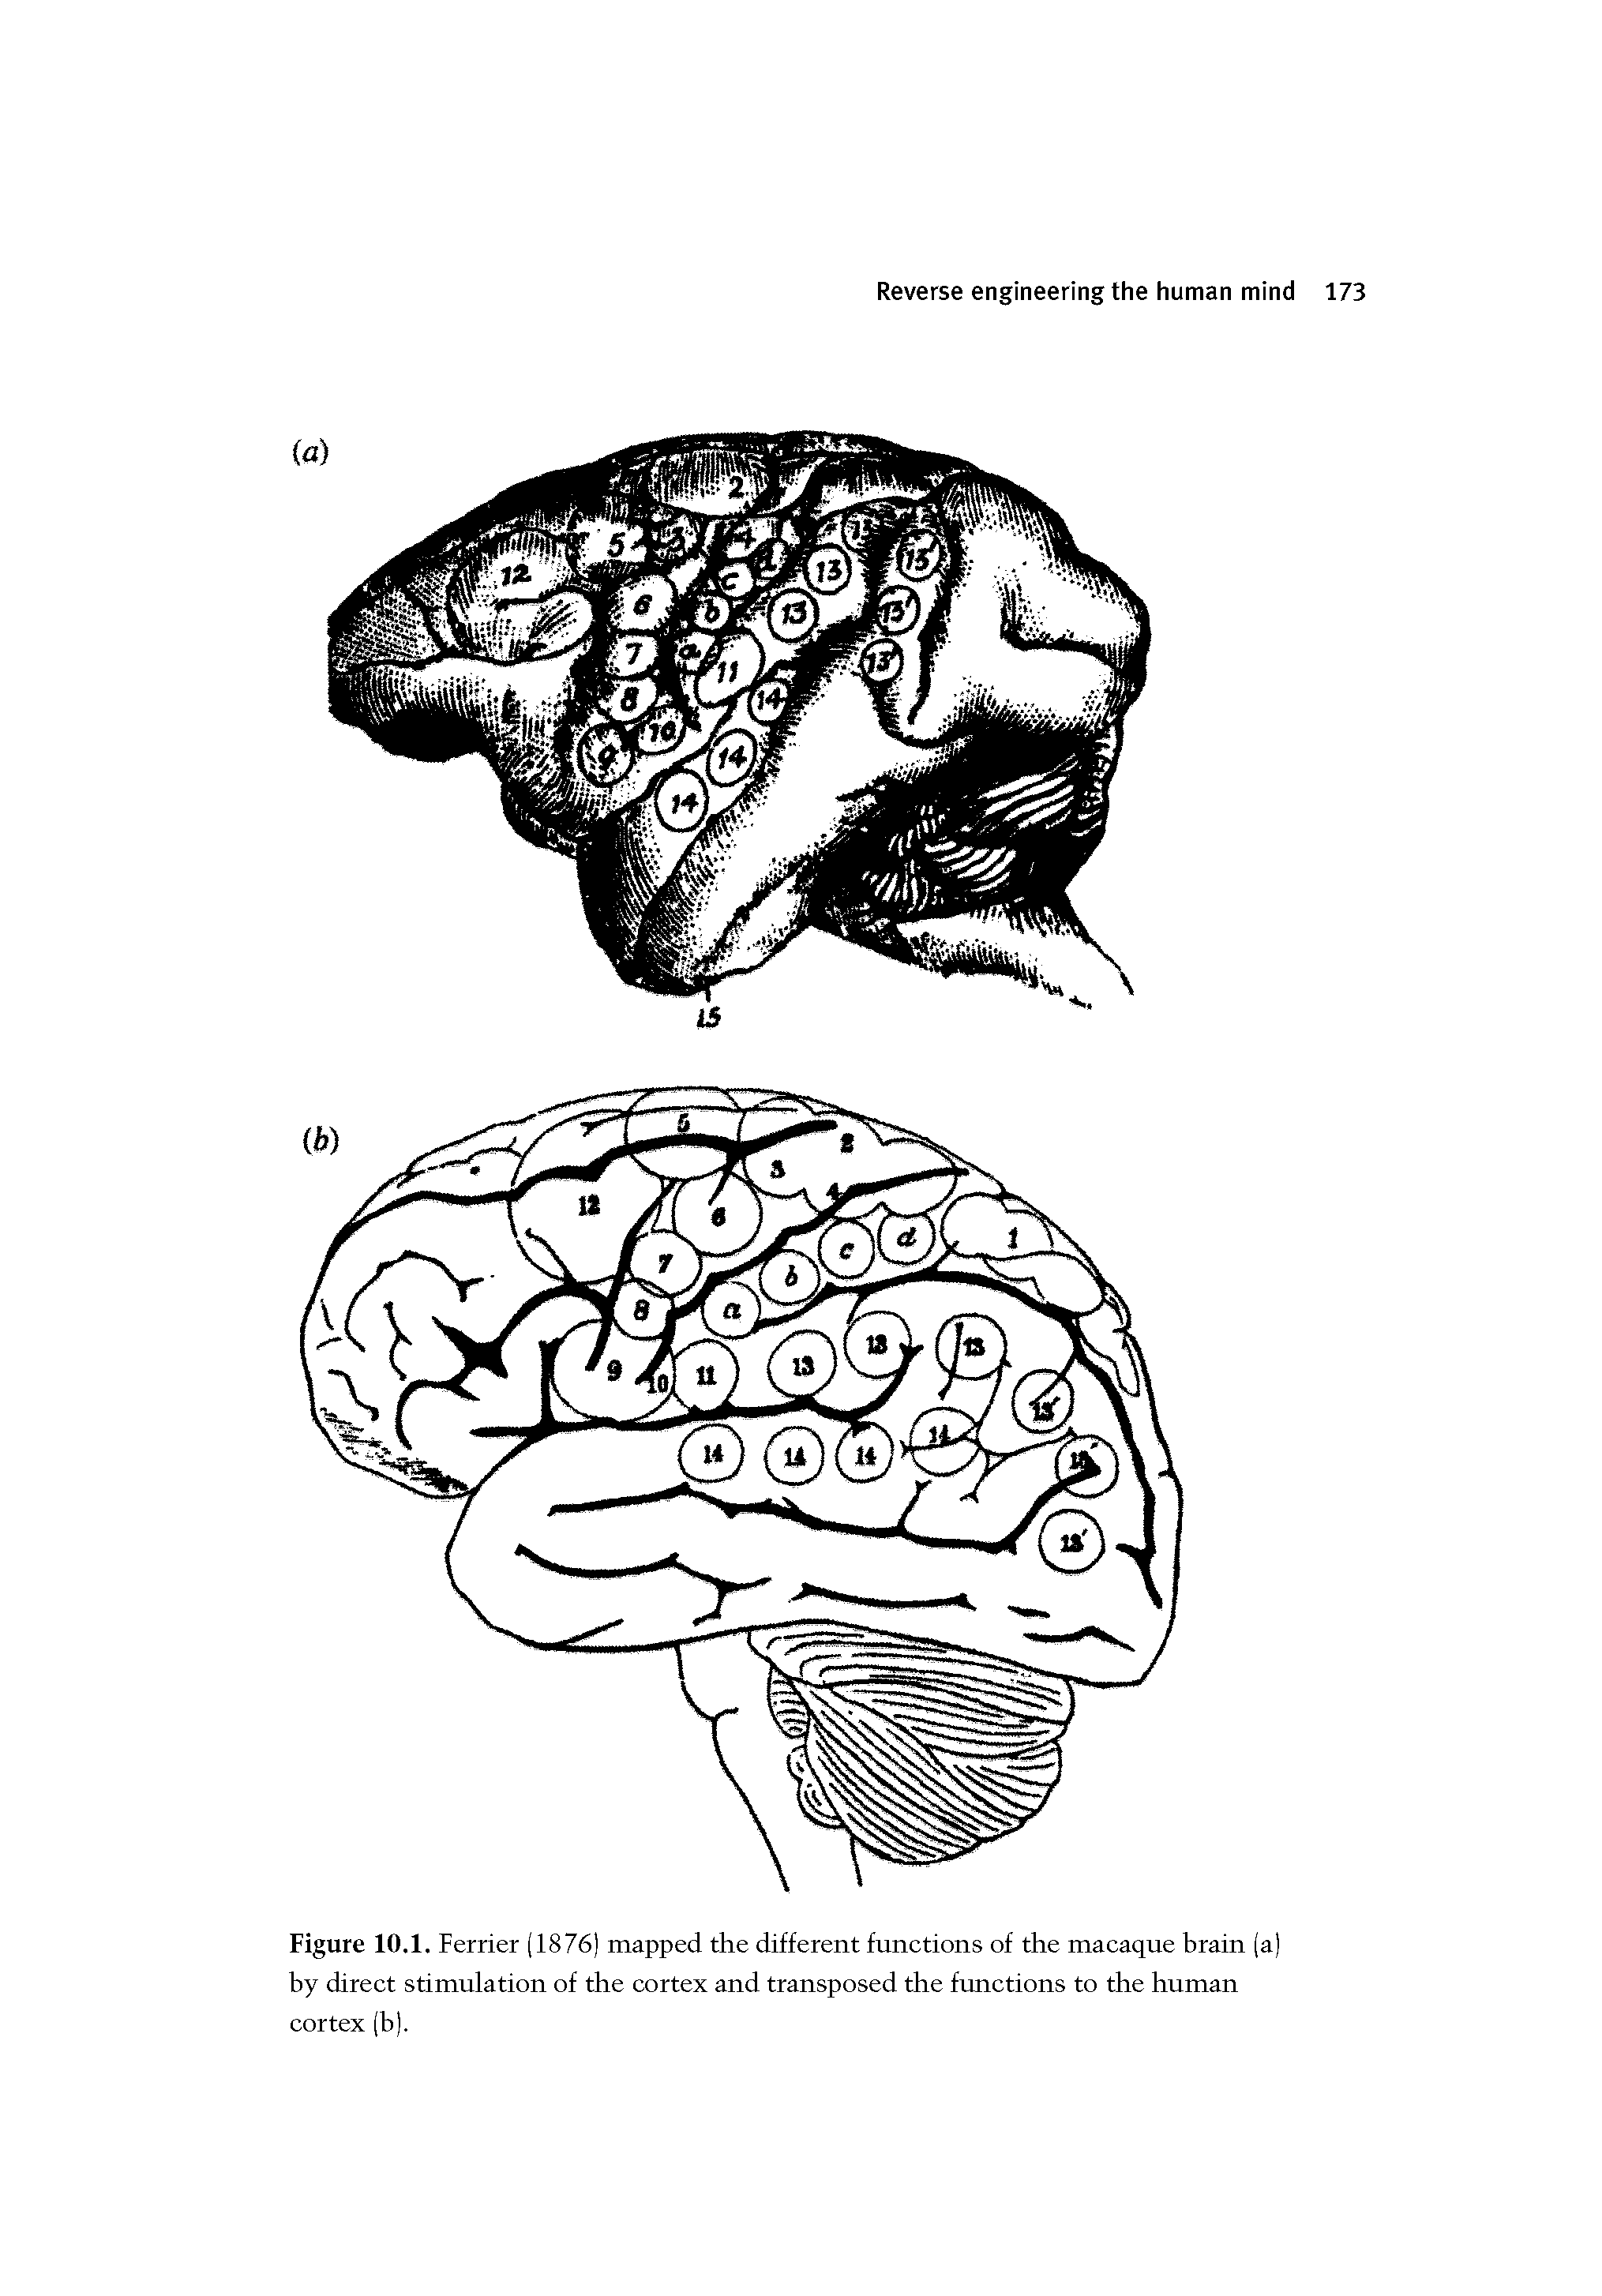 Figure 10.1. Ferrier (1876) mapped the different functions of the macaque brain (a) by direct stimulation of the cortex and transposed the functions to the human cortex (b).